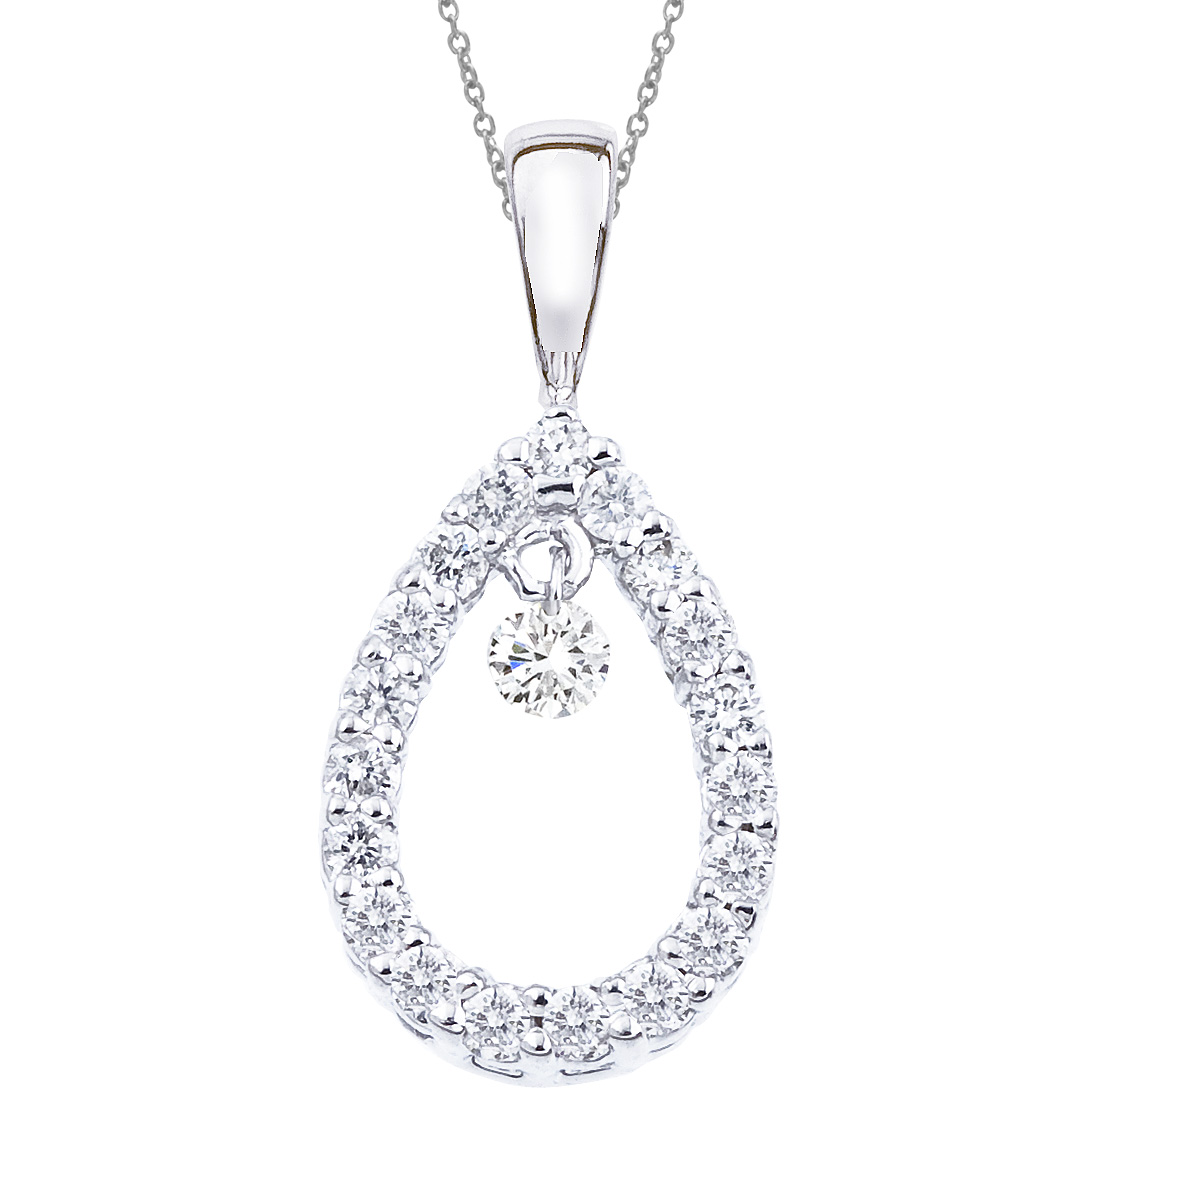 JCX2923: 14k gold Dashinng Diamonds pendant with 0.25 total ct diamonds. The center dangling diamond dances and shimmers with every heartbeat.